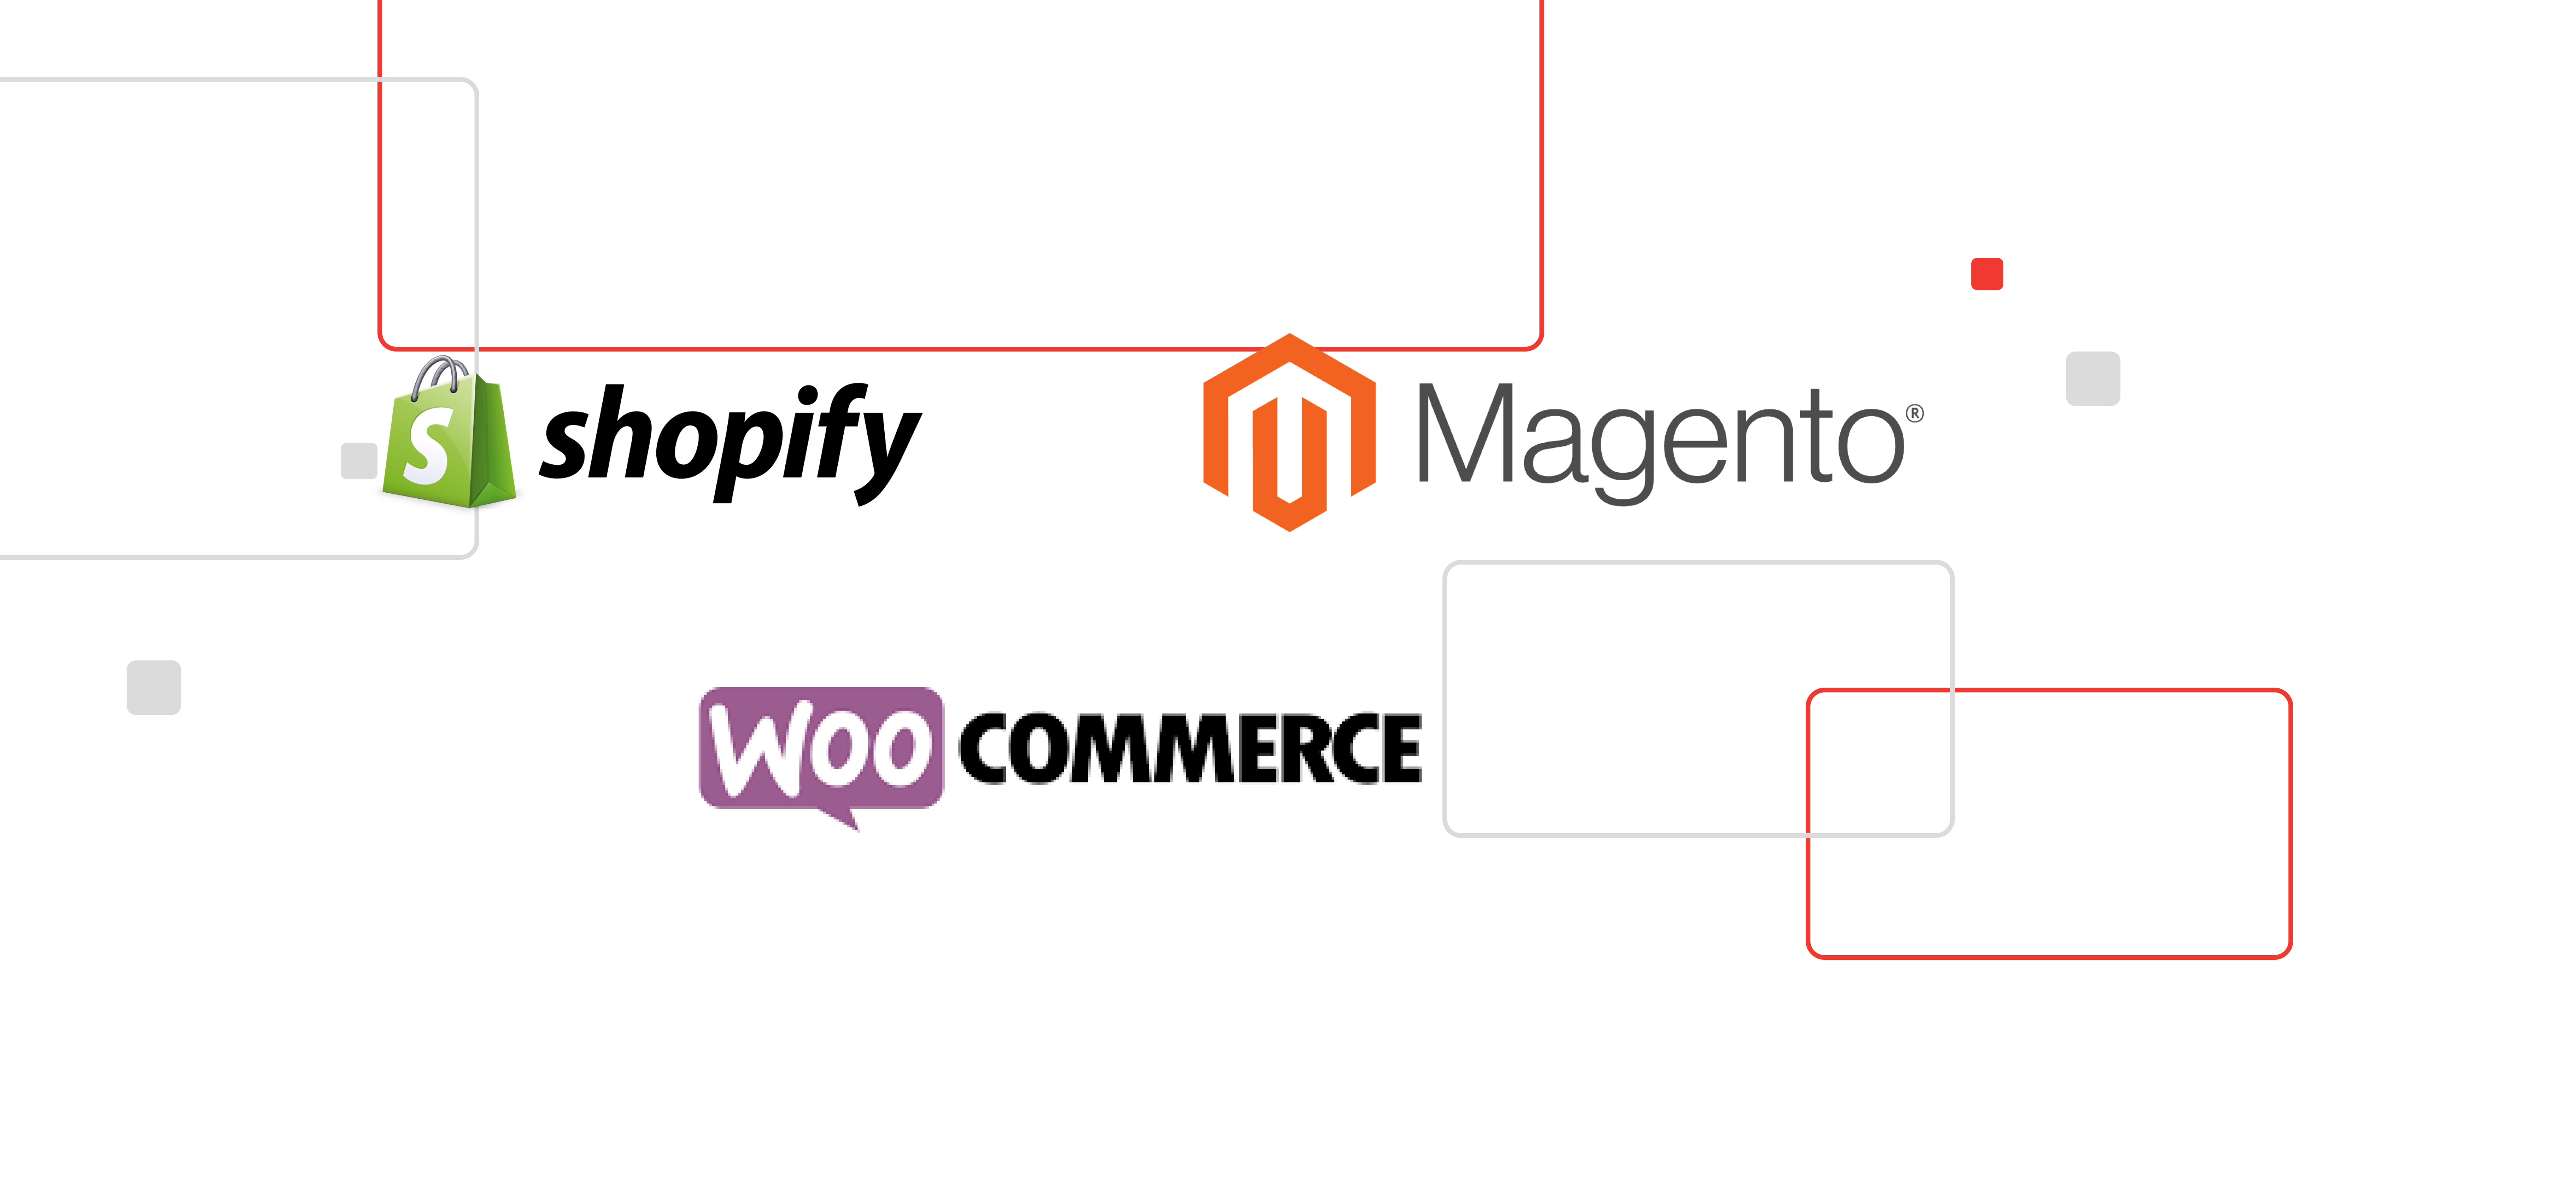 Woocommerce, Magento, and Shopify